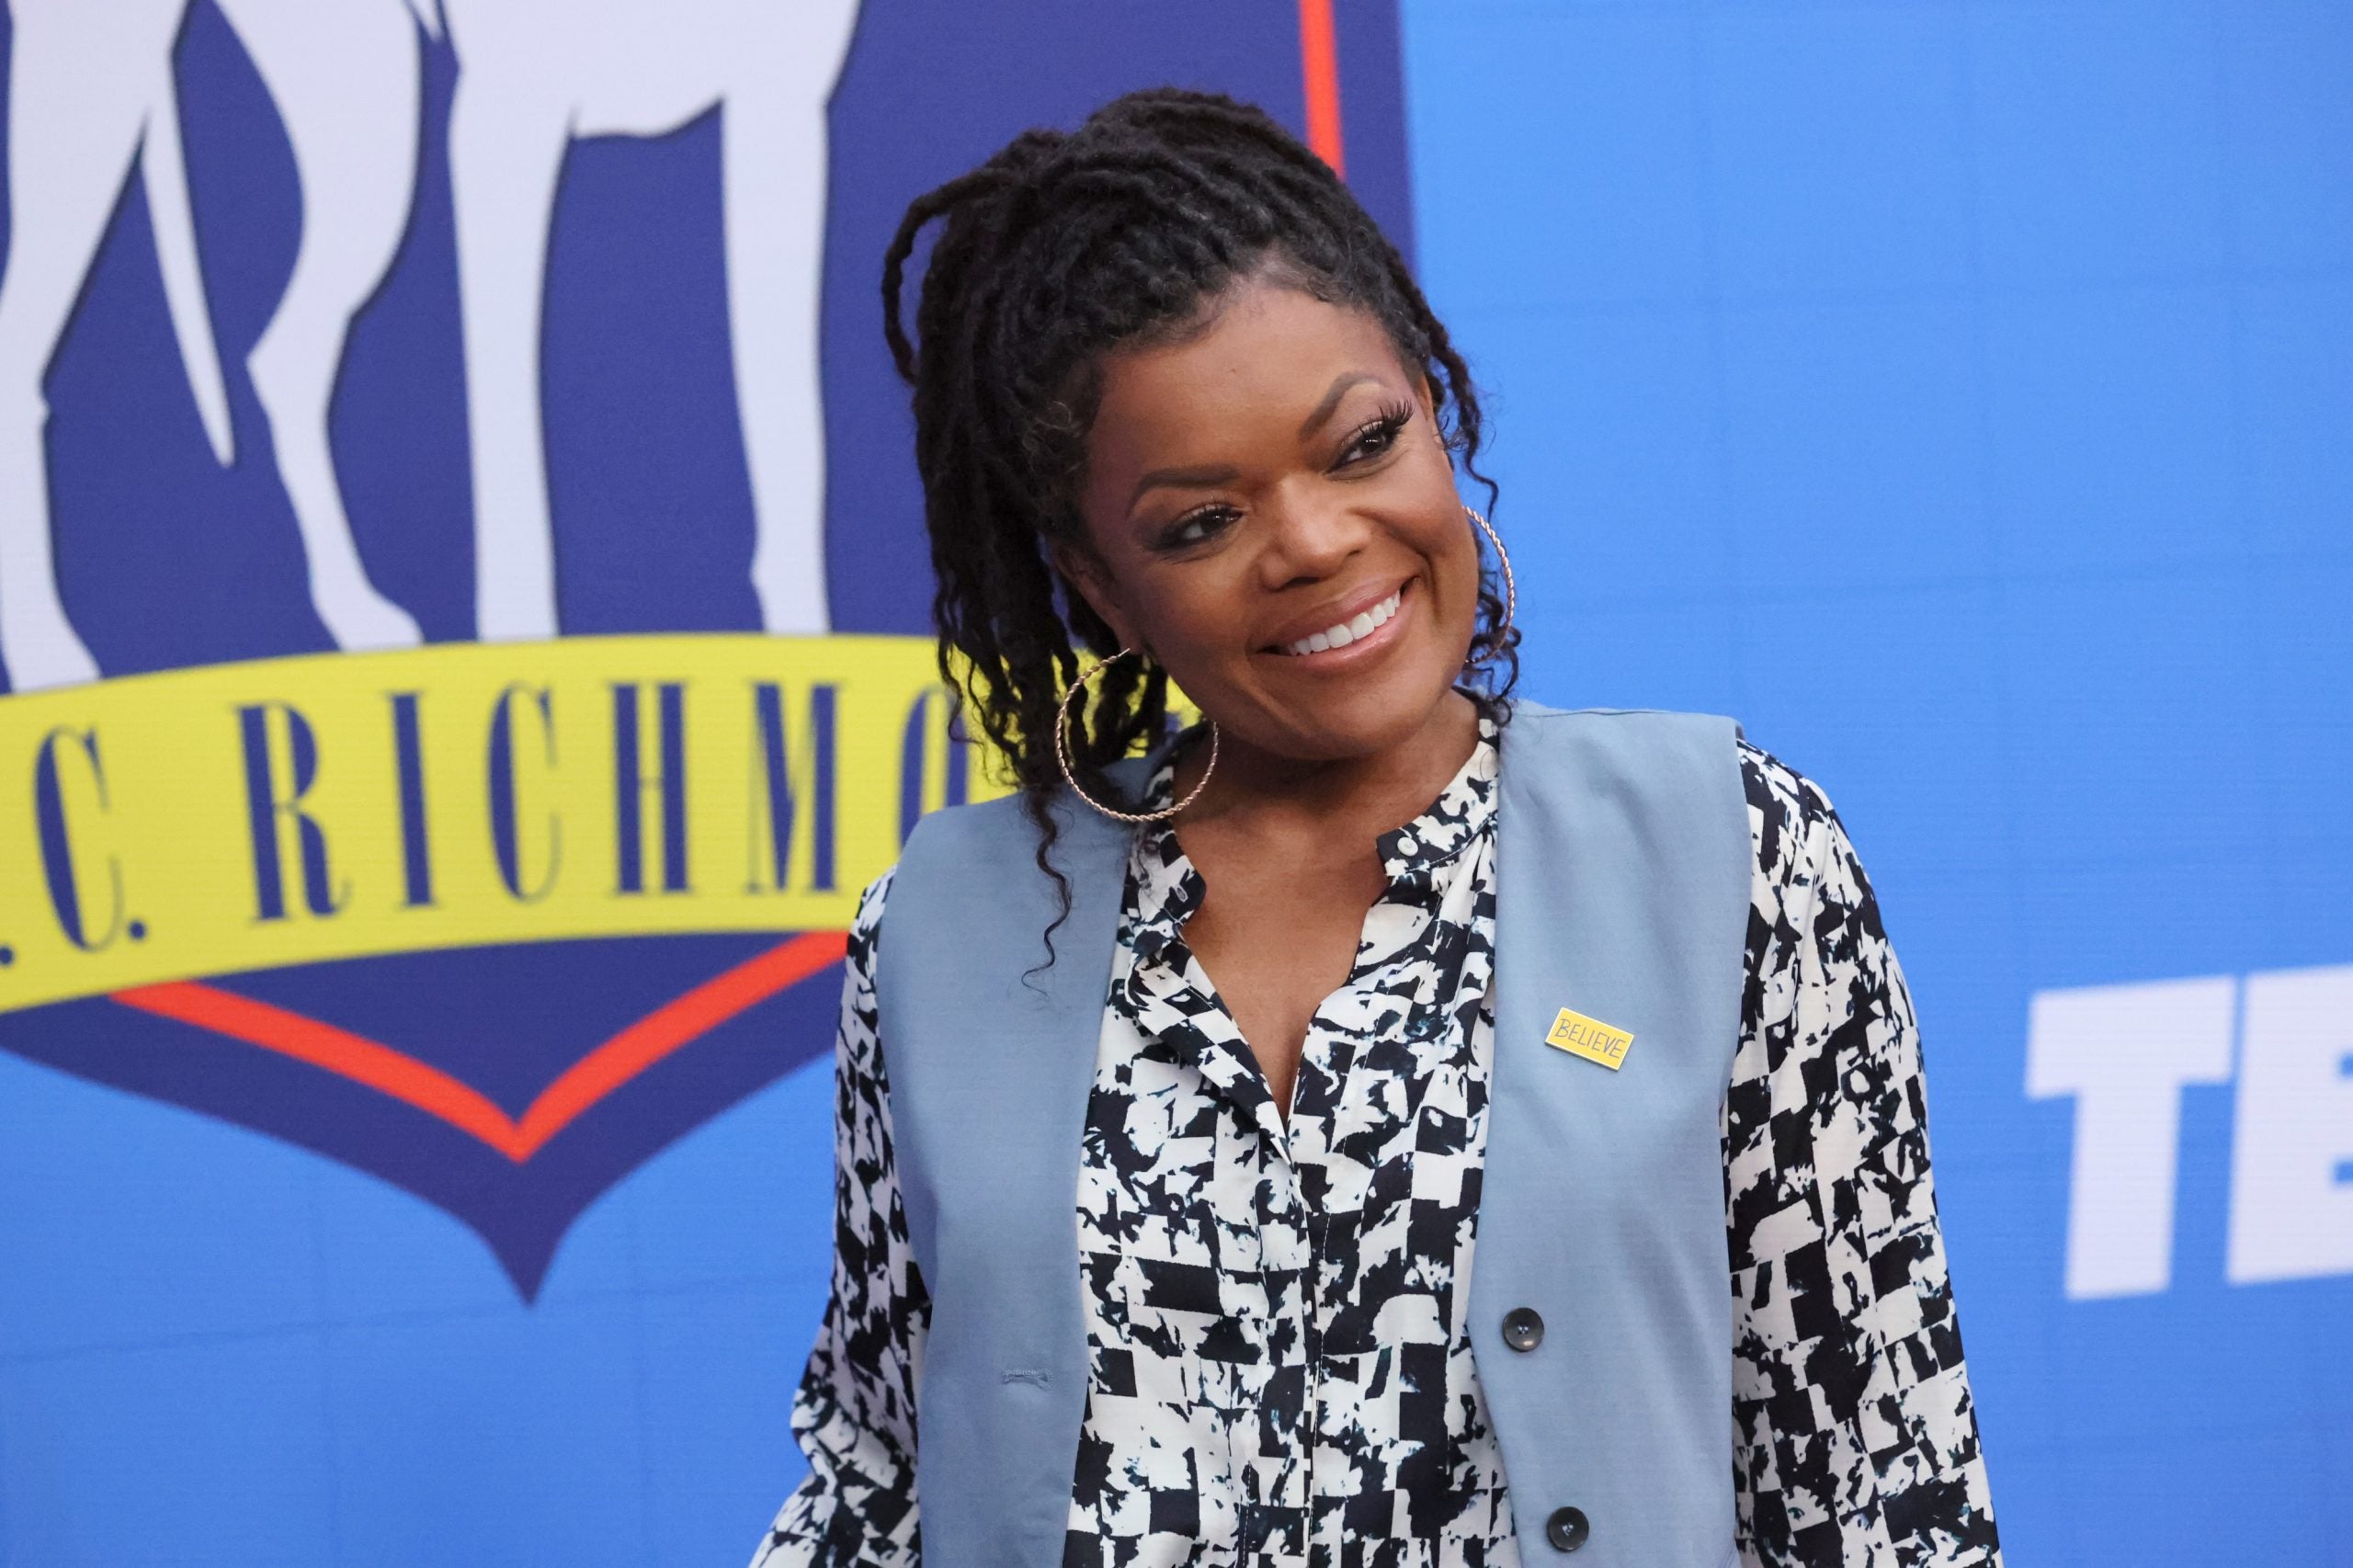 Yvette Nicole Brown Sees “Act Your Age” As The New “Golden Girls”